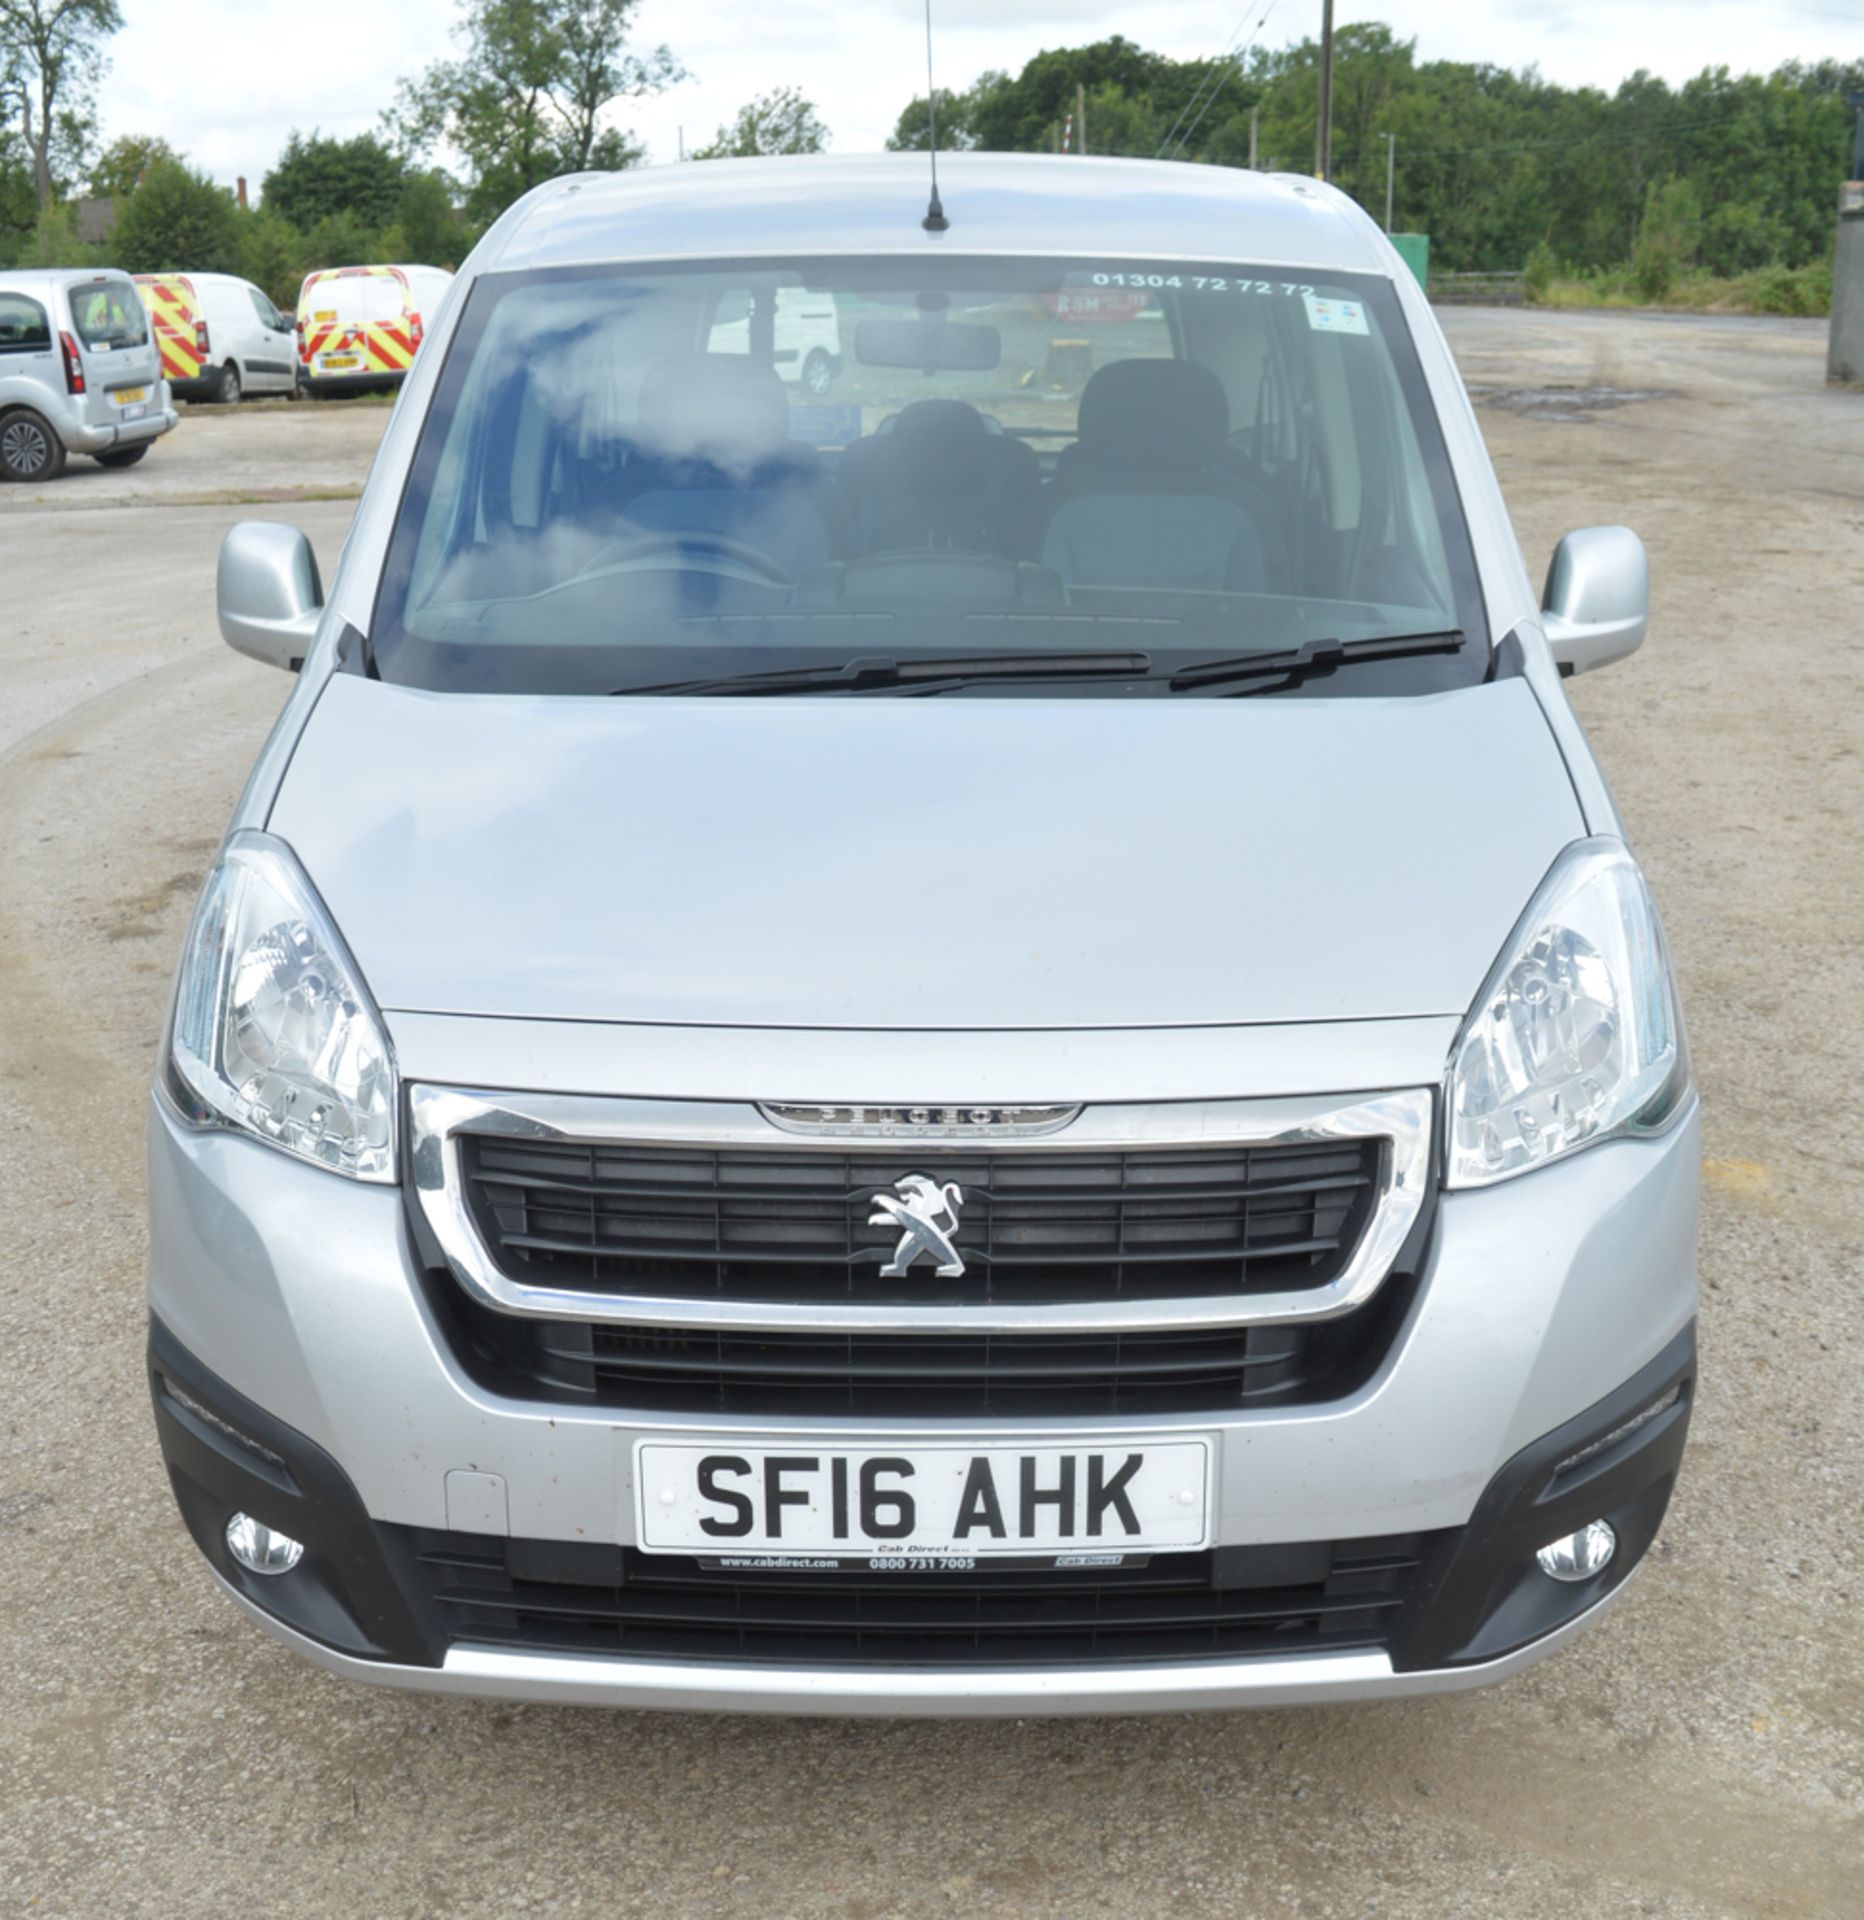 Peugeot Premier RS Blue HDI S/S 5 seat wheelchair access MPV Registration number: SF16 AHK Date of - Image 5 of 11